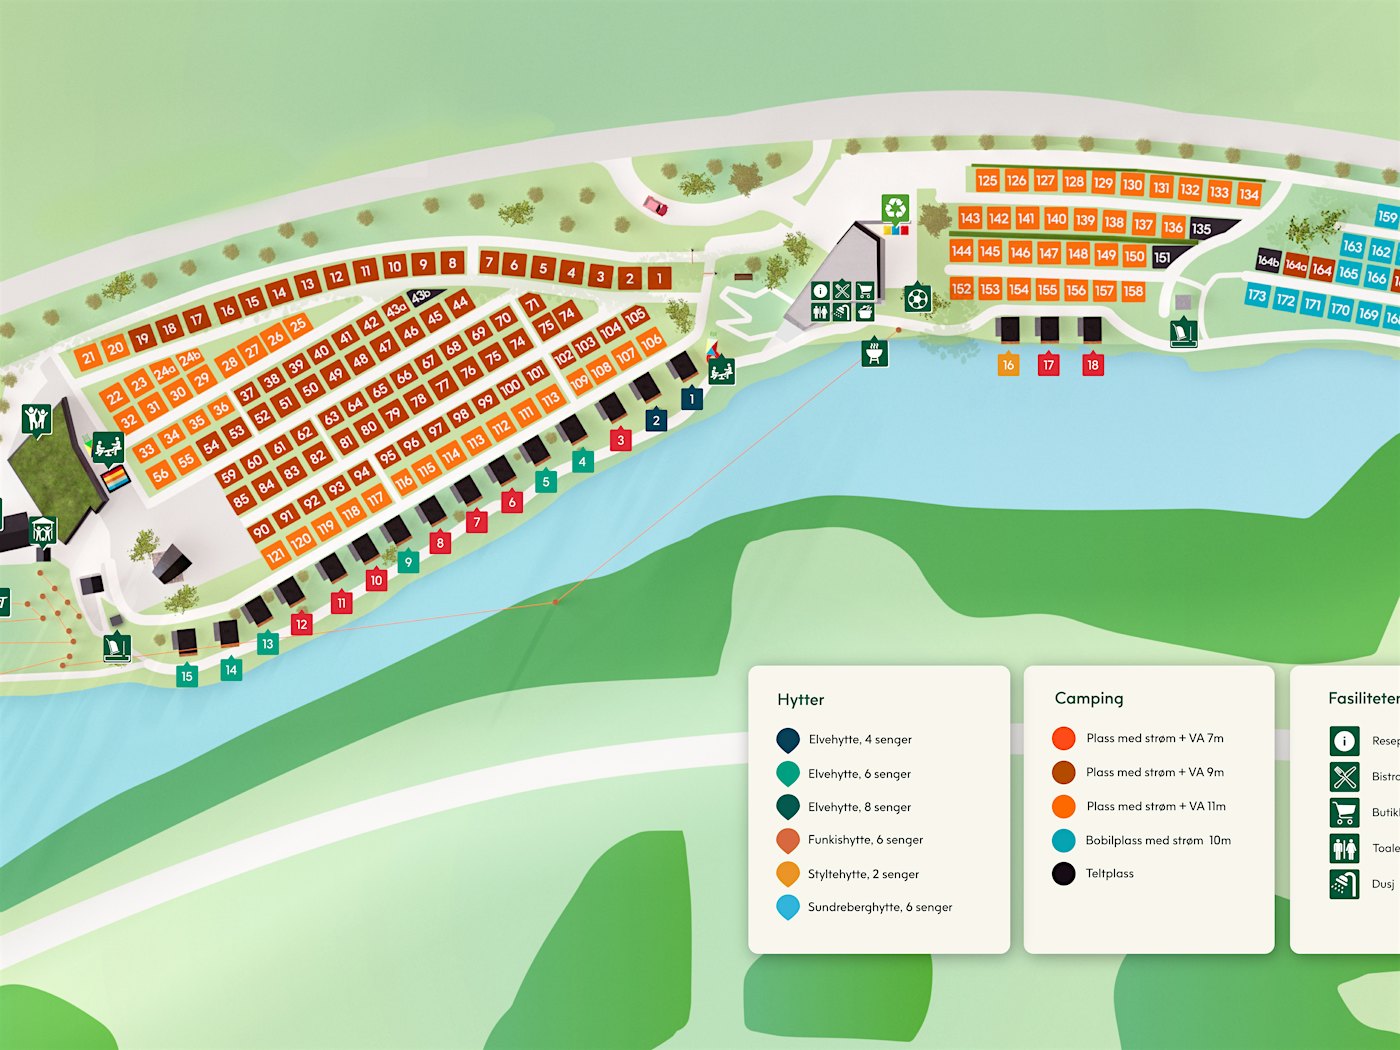 Illustration map of the area with place numbers and buildings.